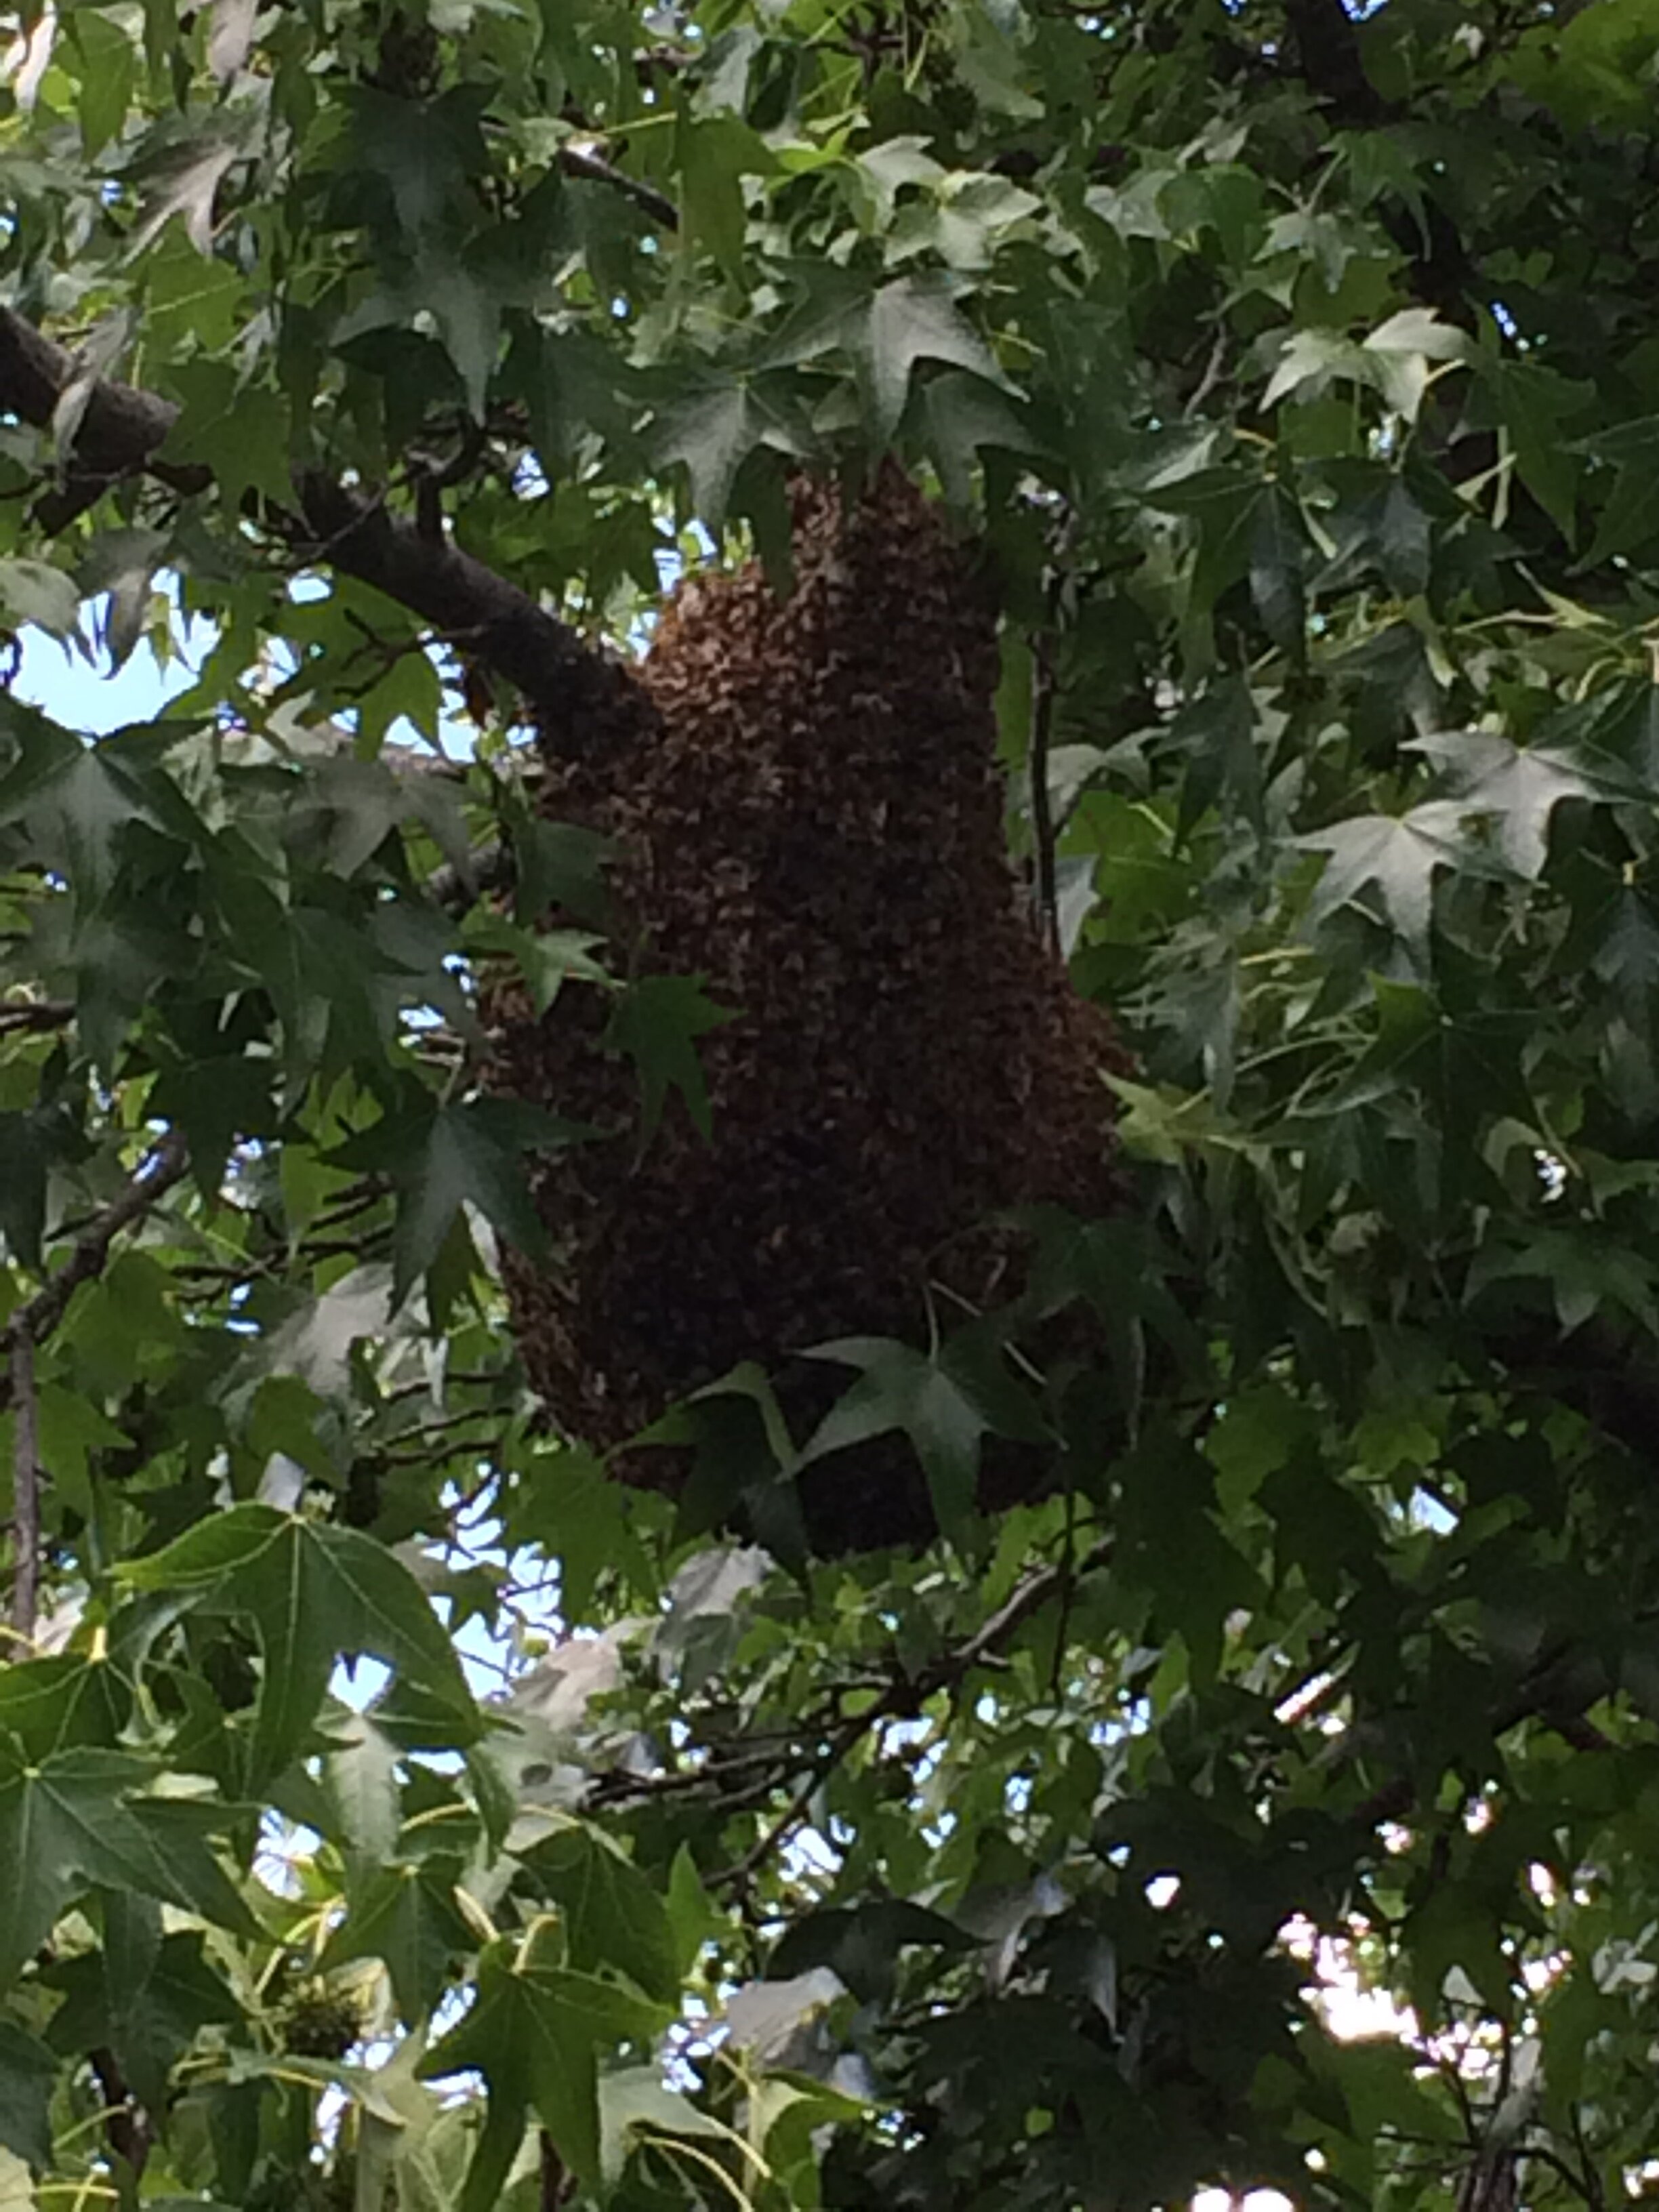 A swarm awaiting collection